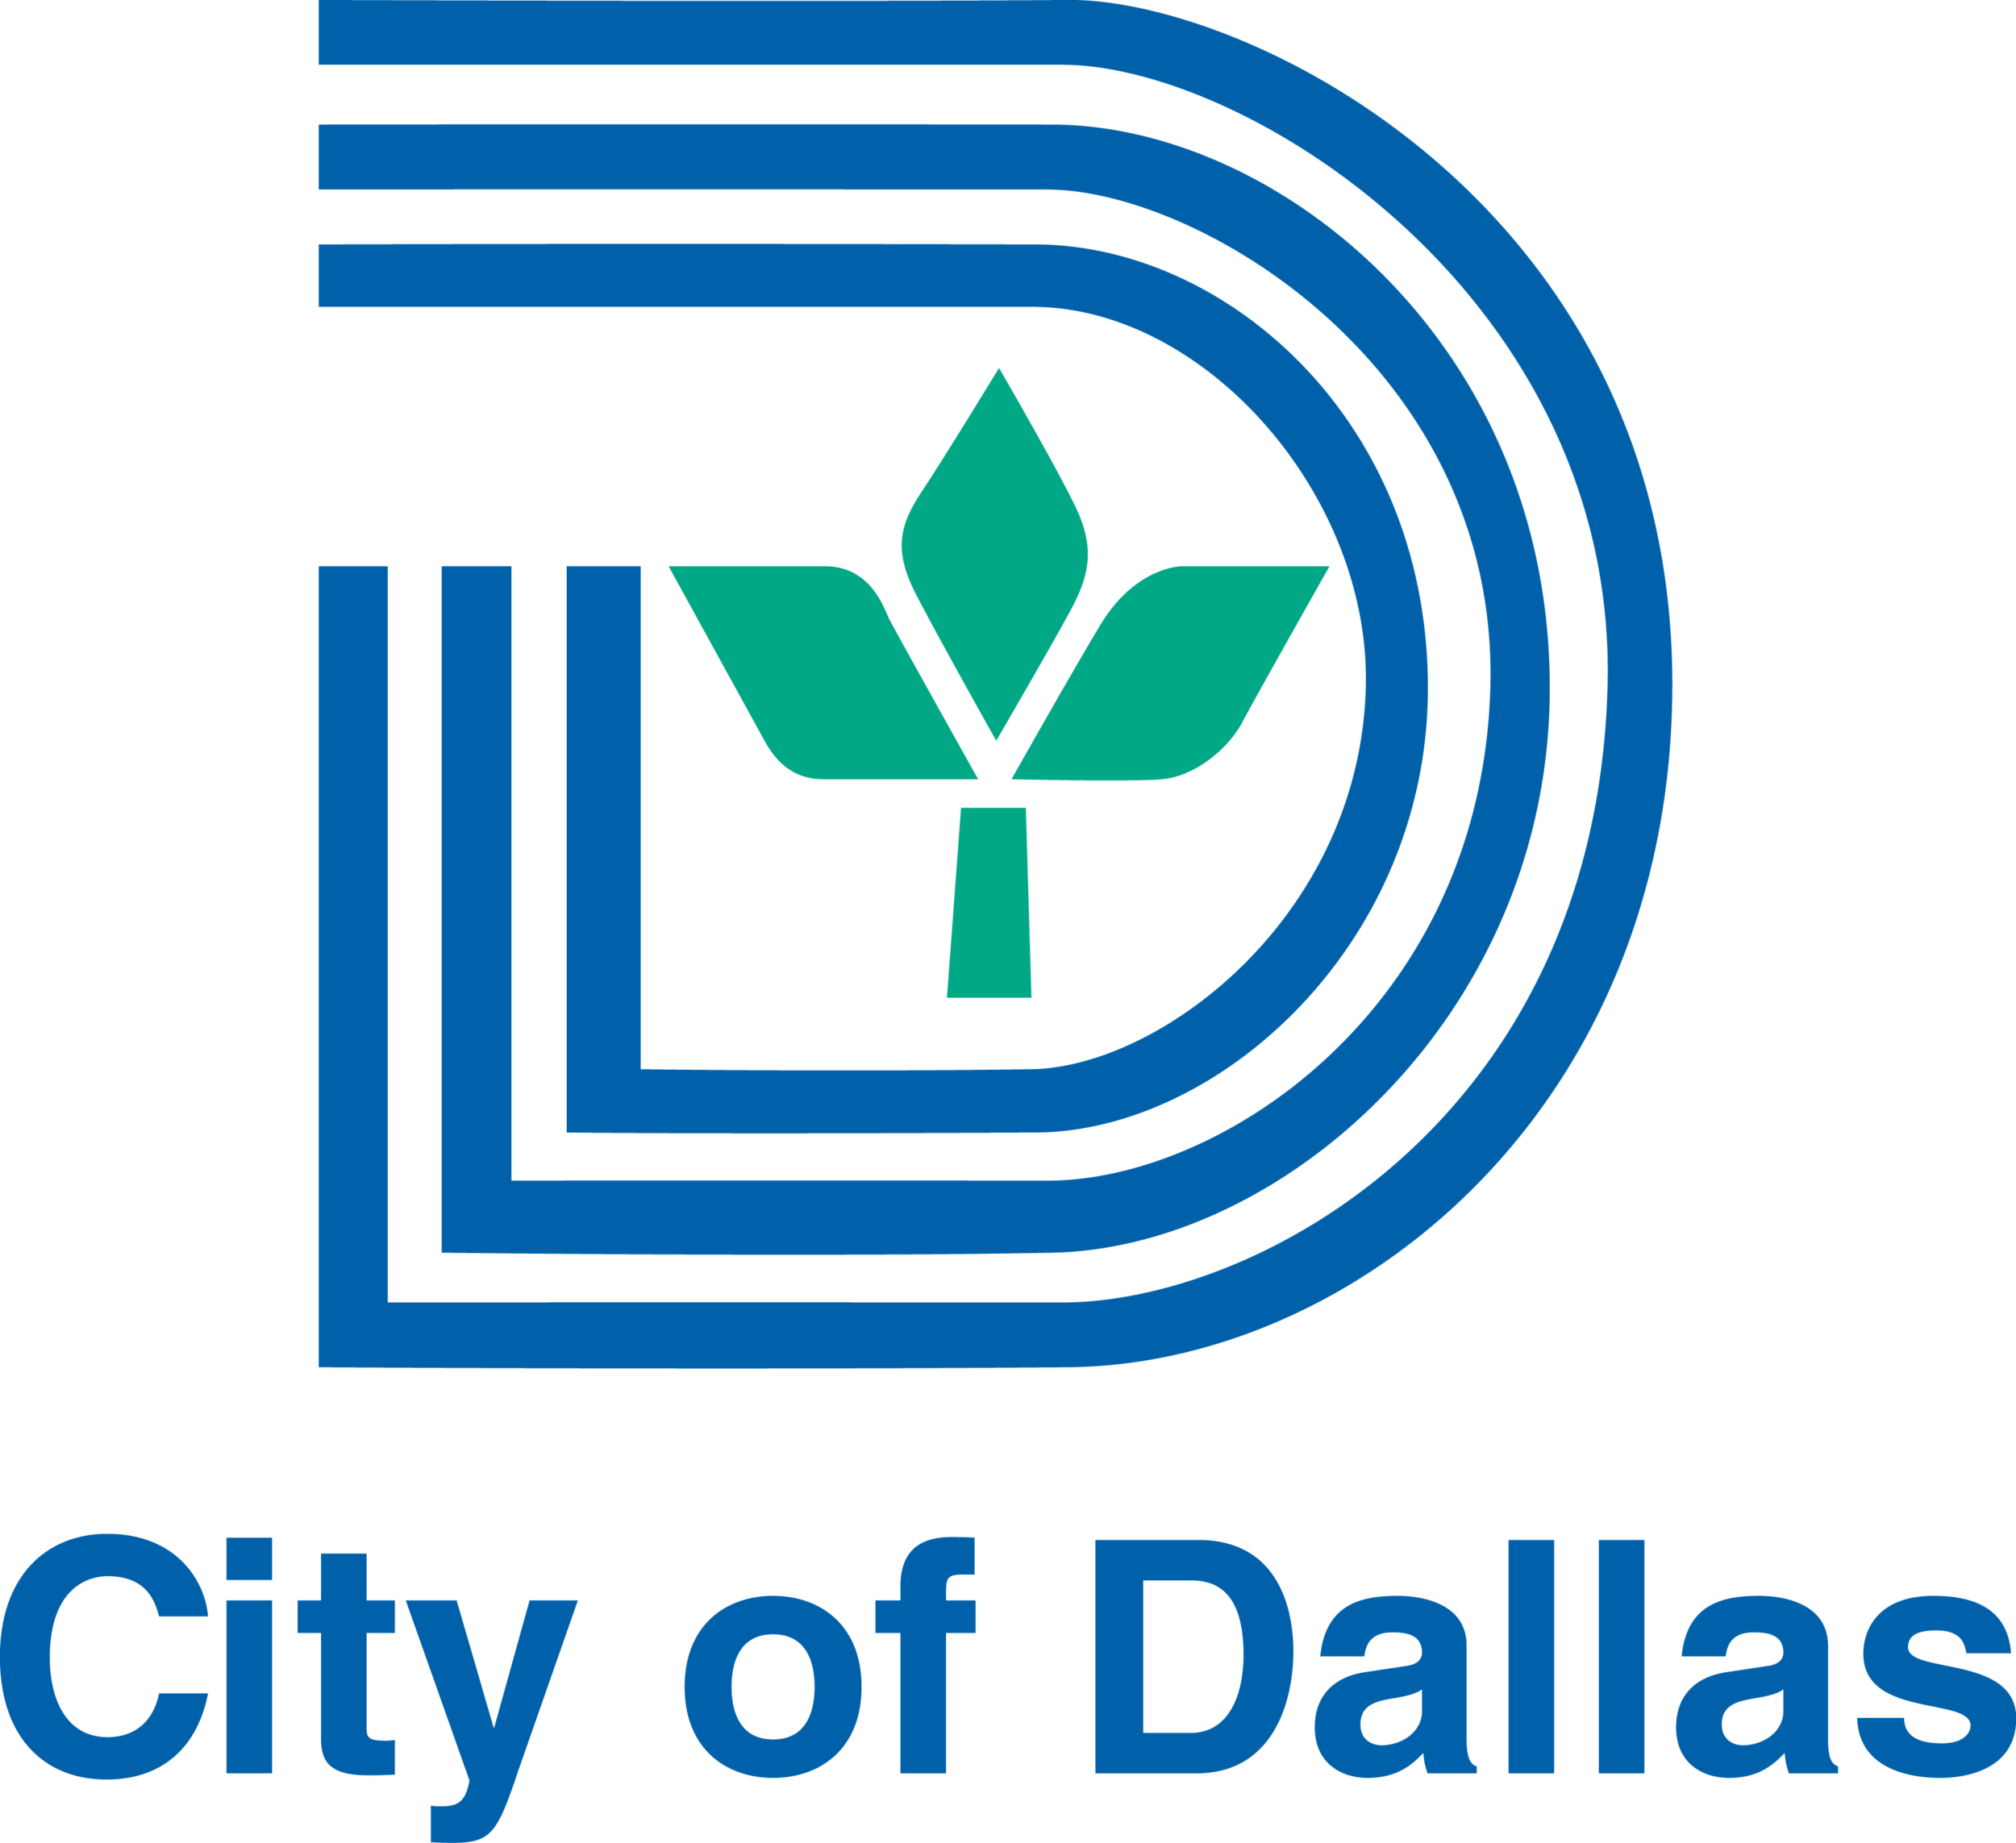 city_of_dallas_logo_by_soulcomplex-d7nzd00.png